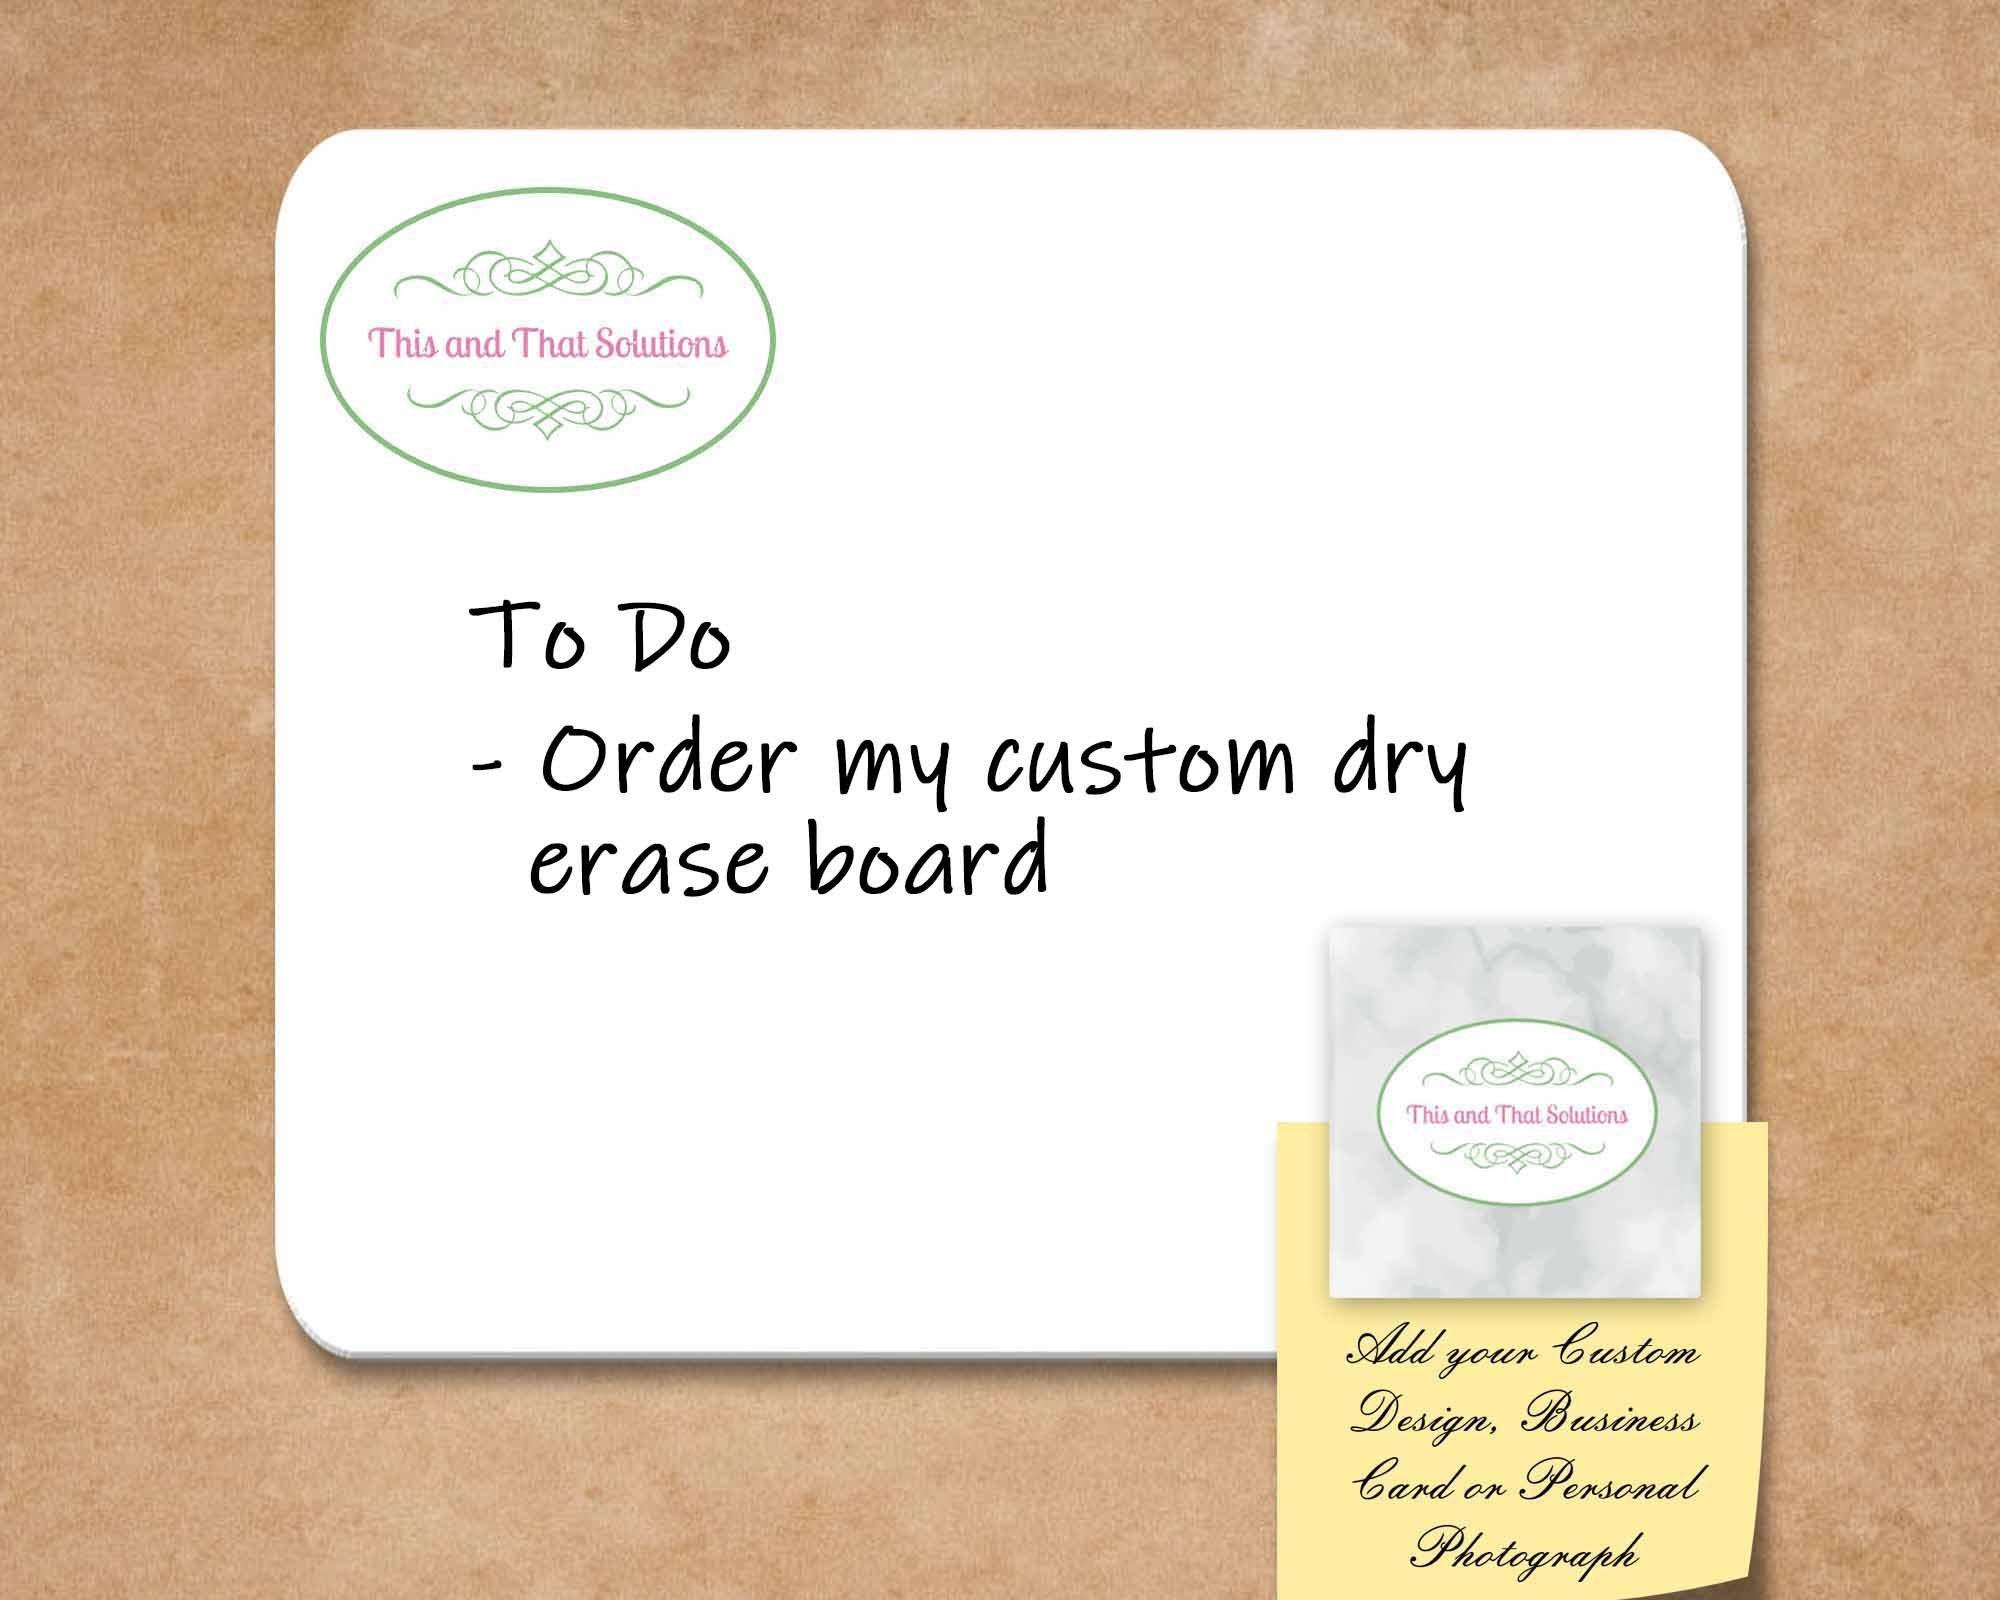 Customized Dry Erase Boards | Personalized Office Accessories | Company Logo - This & That Solutions - Customized Dry Erase Boards | Personalized Office Accessories | Company Logo - Personalized Gifts & Custom Home Decor